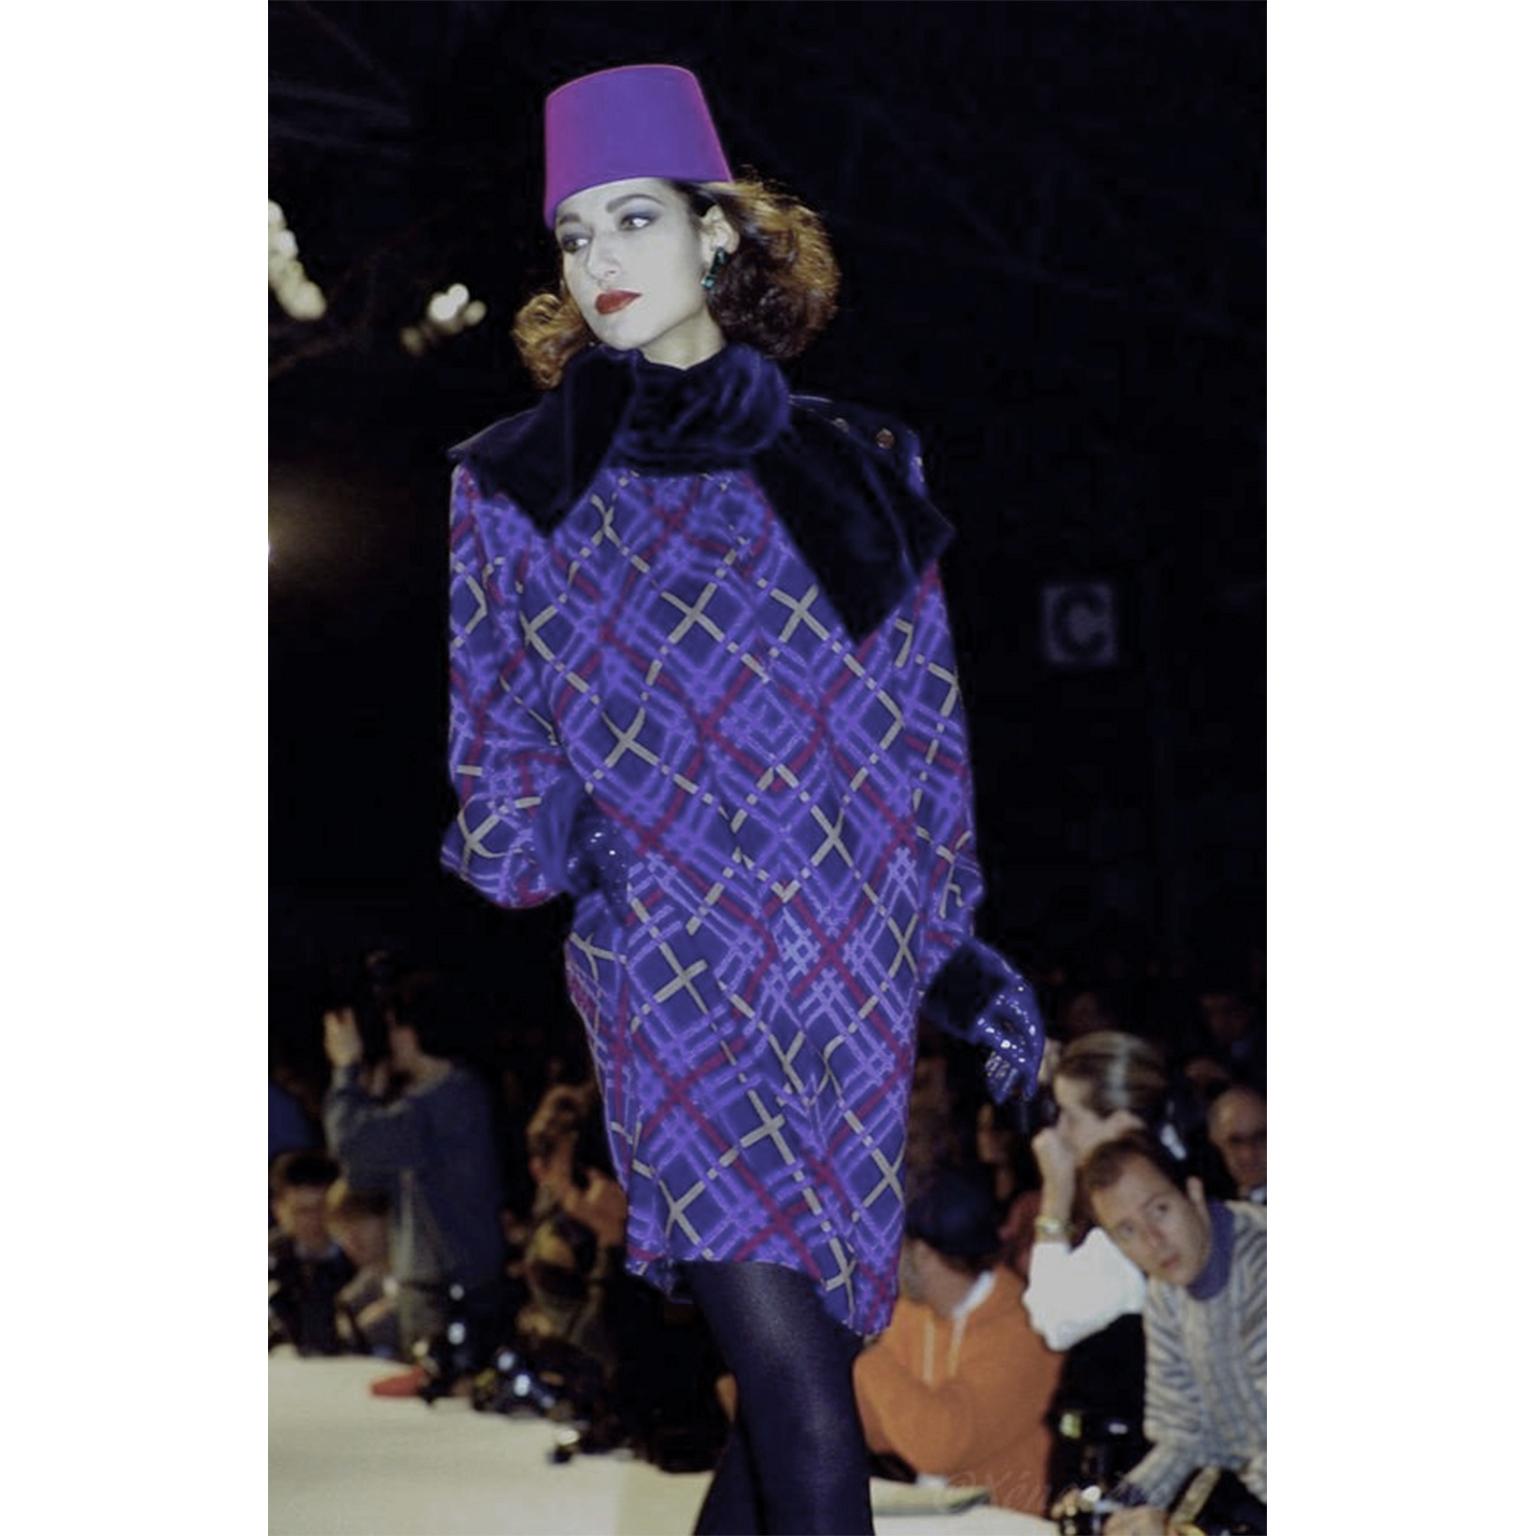 This is an Yves Saint Laurent beautiful plaid wool dress from the YSL F/W 1985 collection. The dress has a saturated shades blue, purple and gold in a plaid, with a dark blue velvet on the shoulders and on the mock turtleneck. This dress opens with